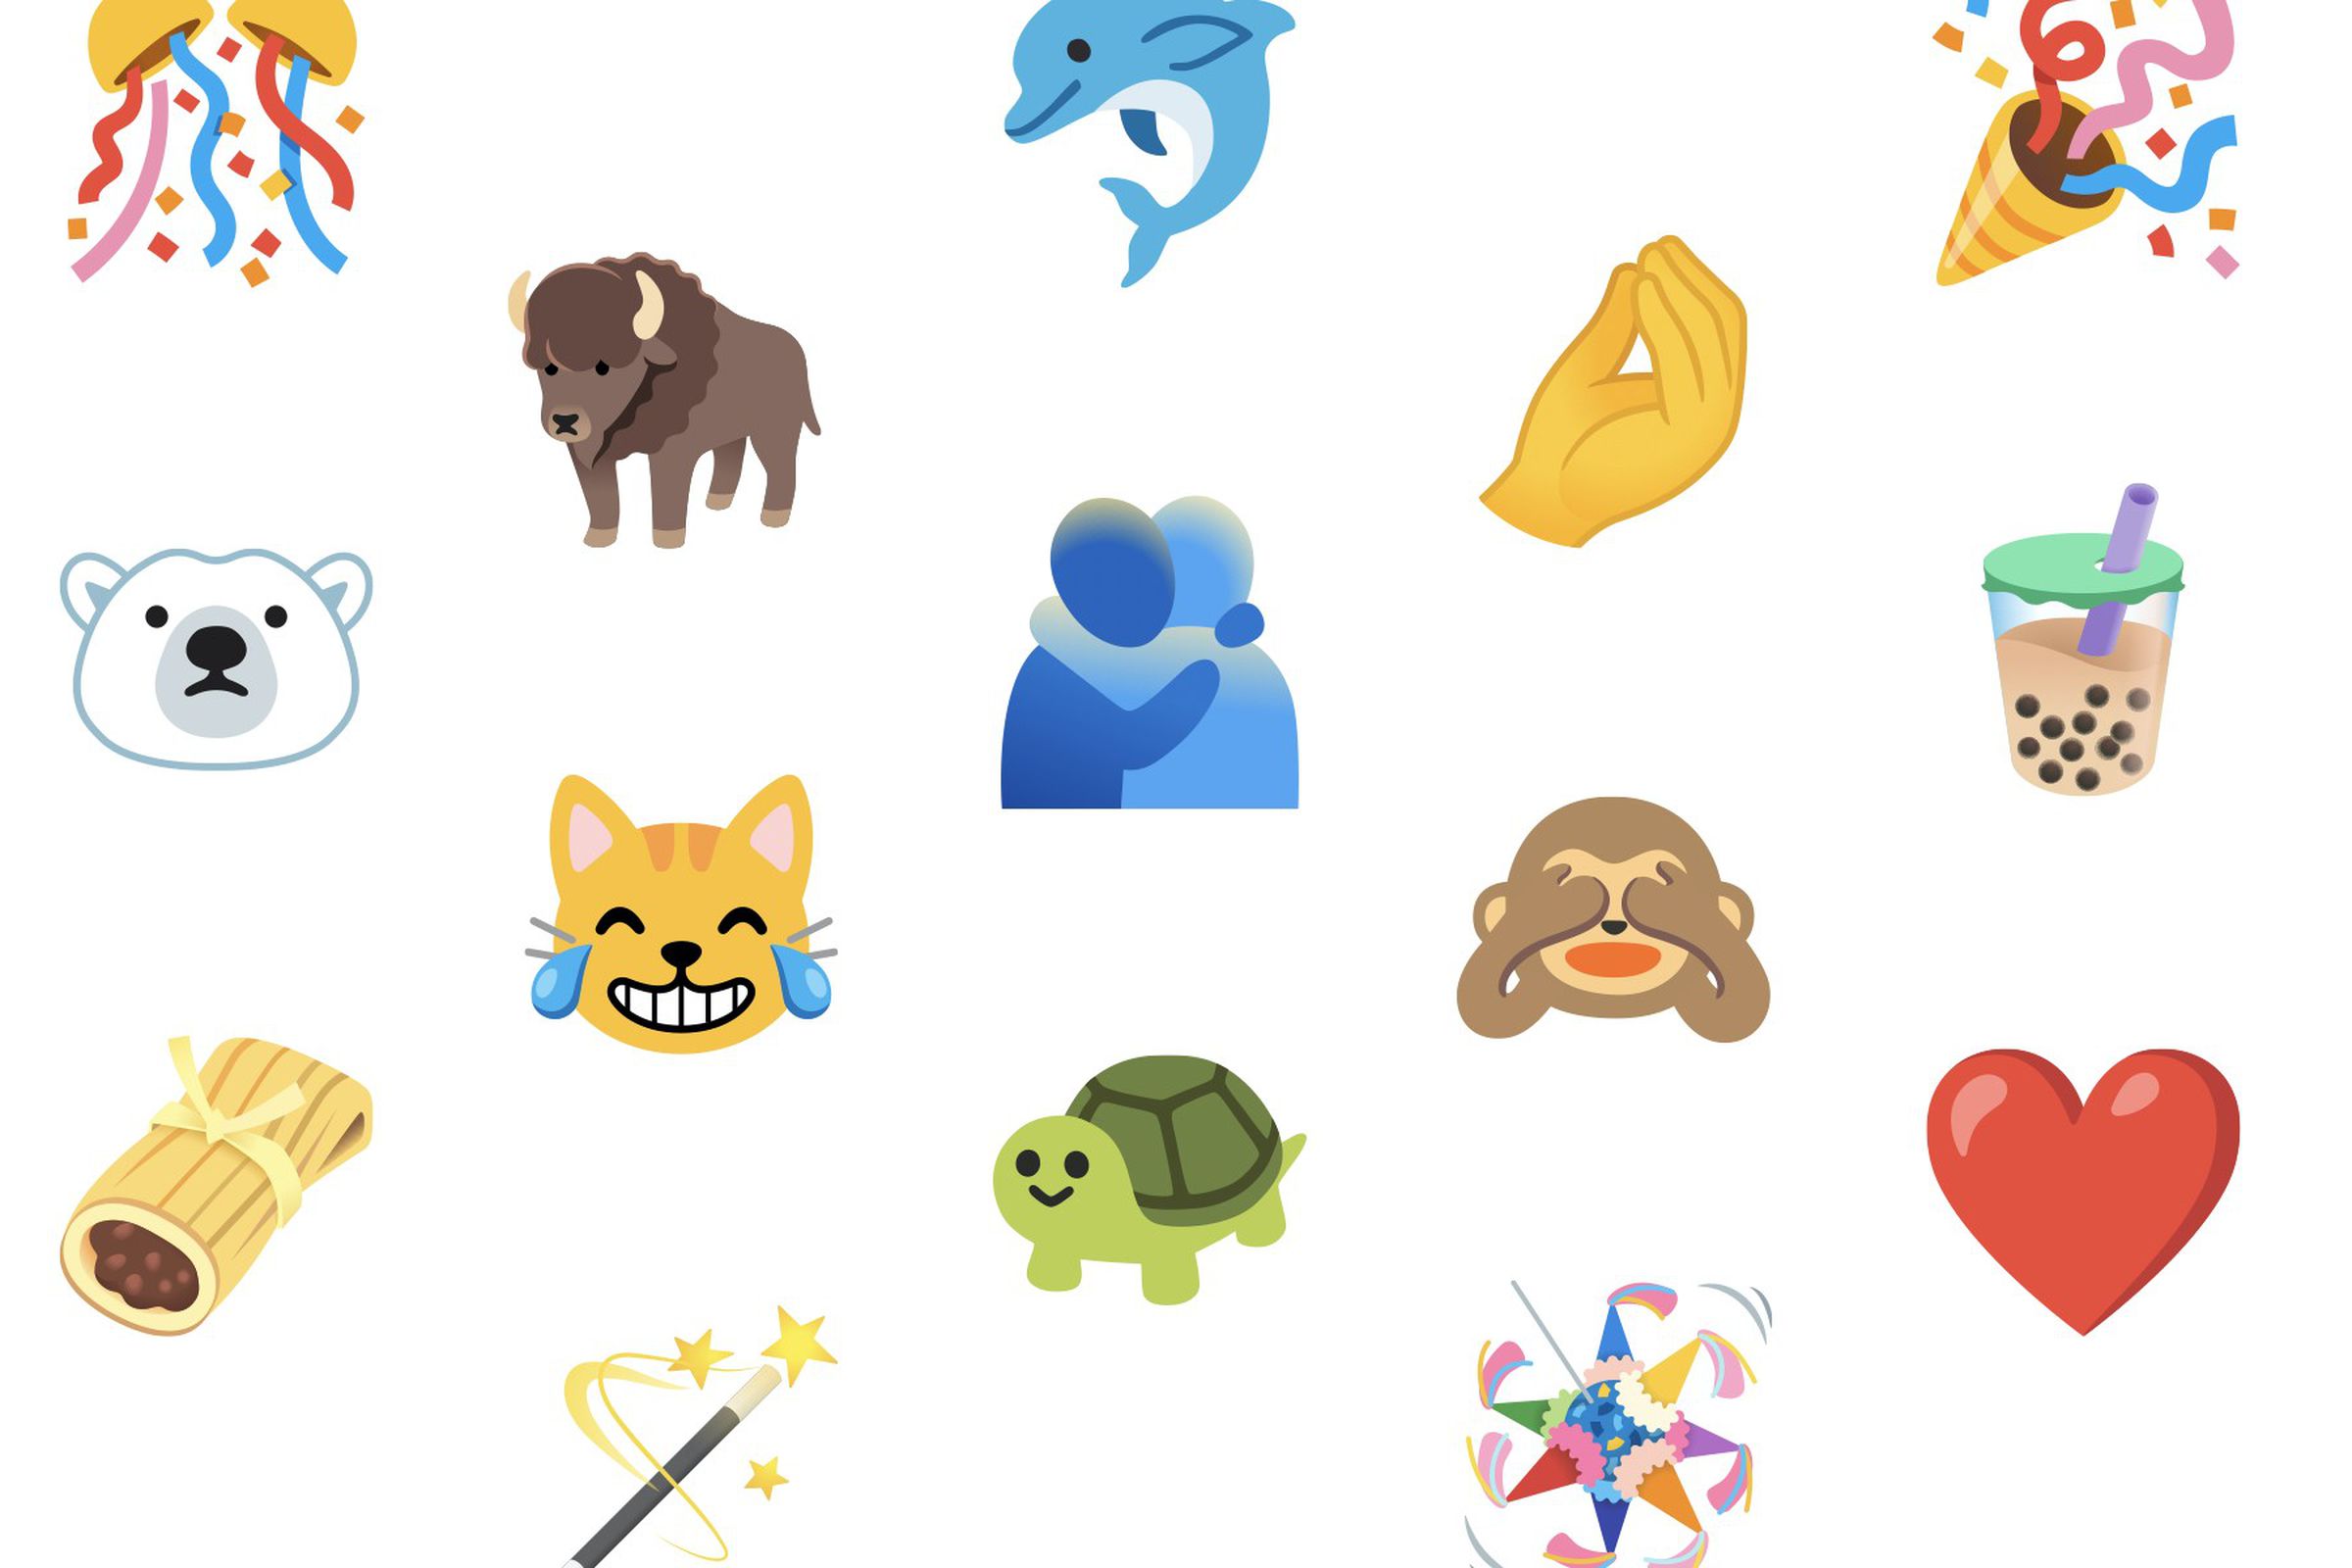 Google’s new designs include an all new polar bear emoji and a redesigned turtle.